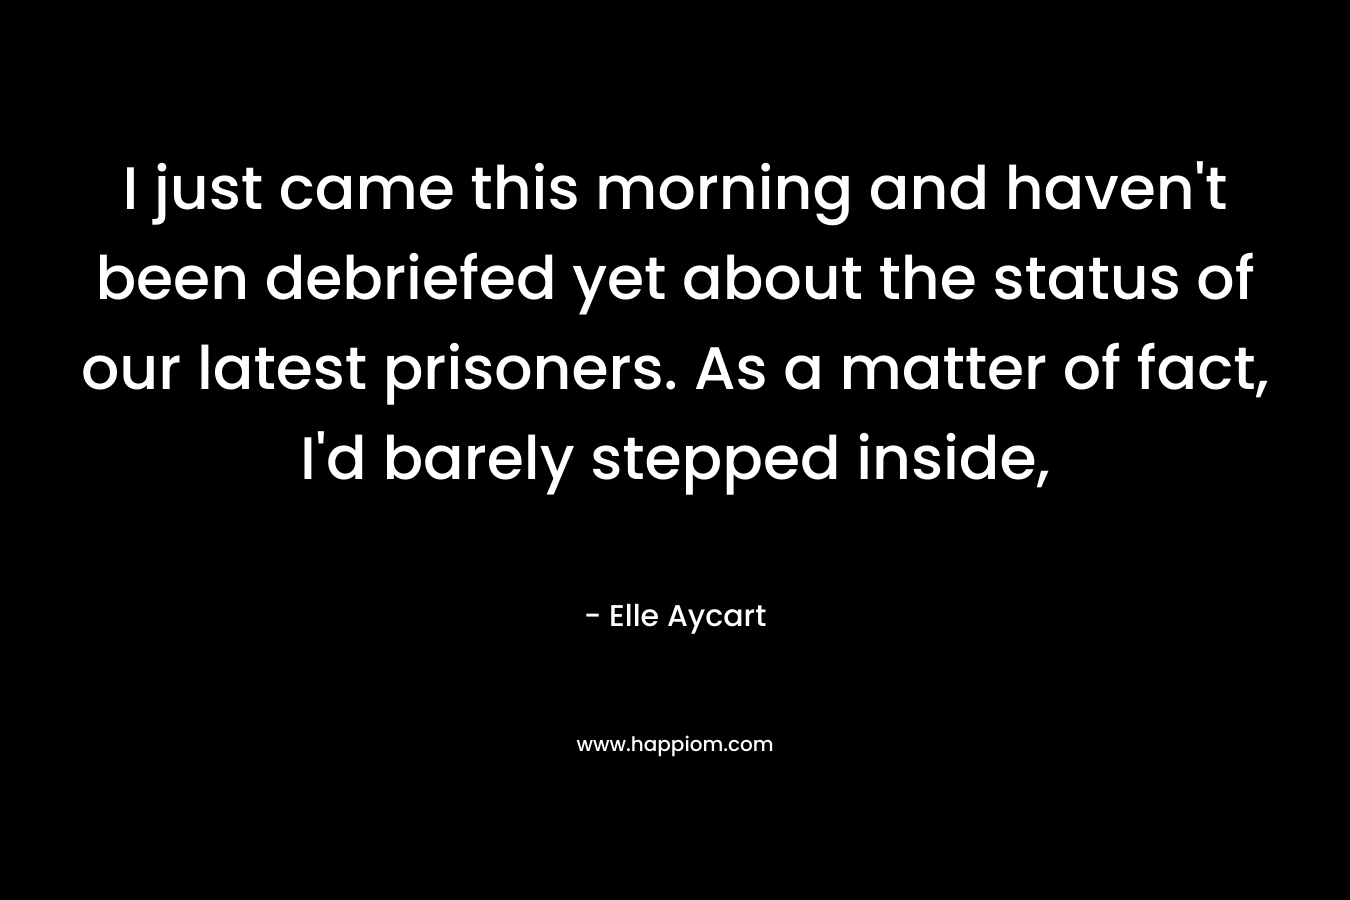 I just came this morning and haven’t been debriefed yet about the status of our latest prisoners. As a matter of fact, I’d barely stepped inside, – Elle Aycart